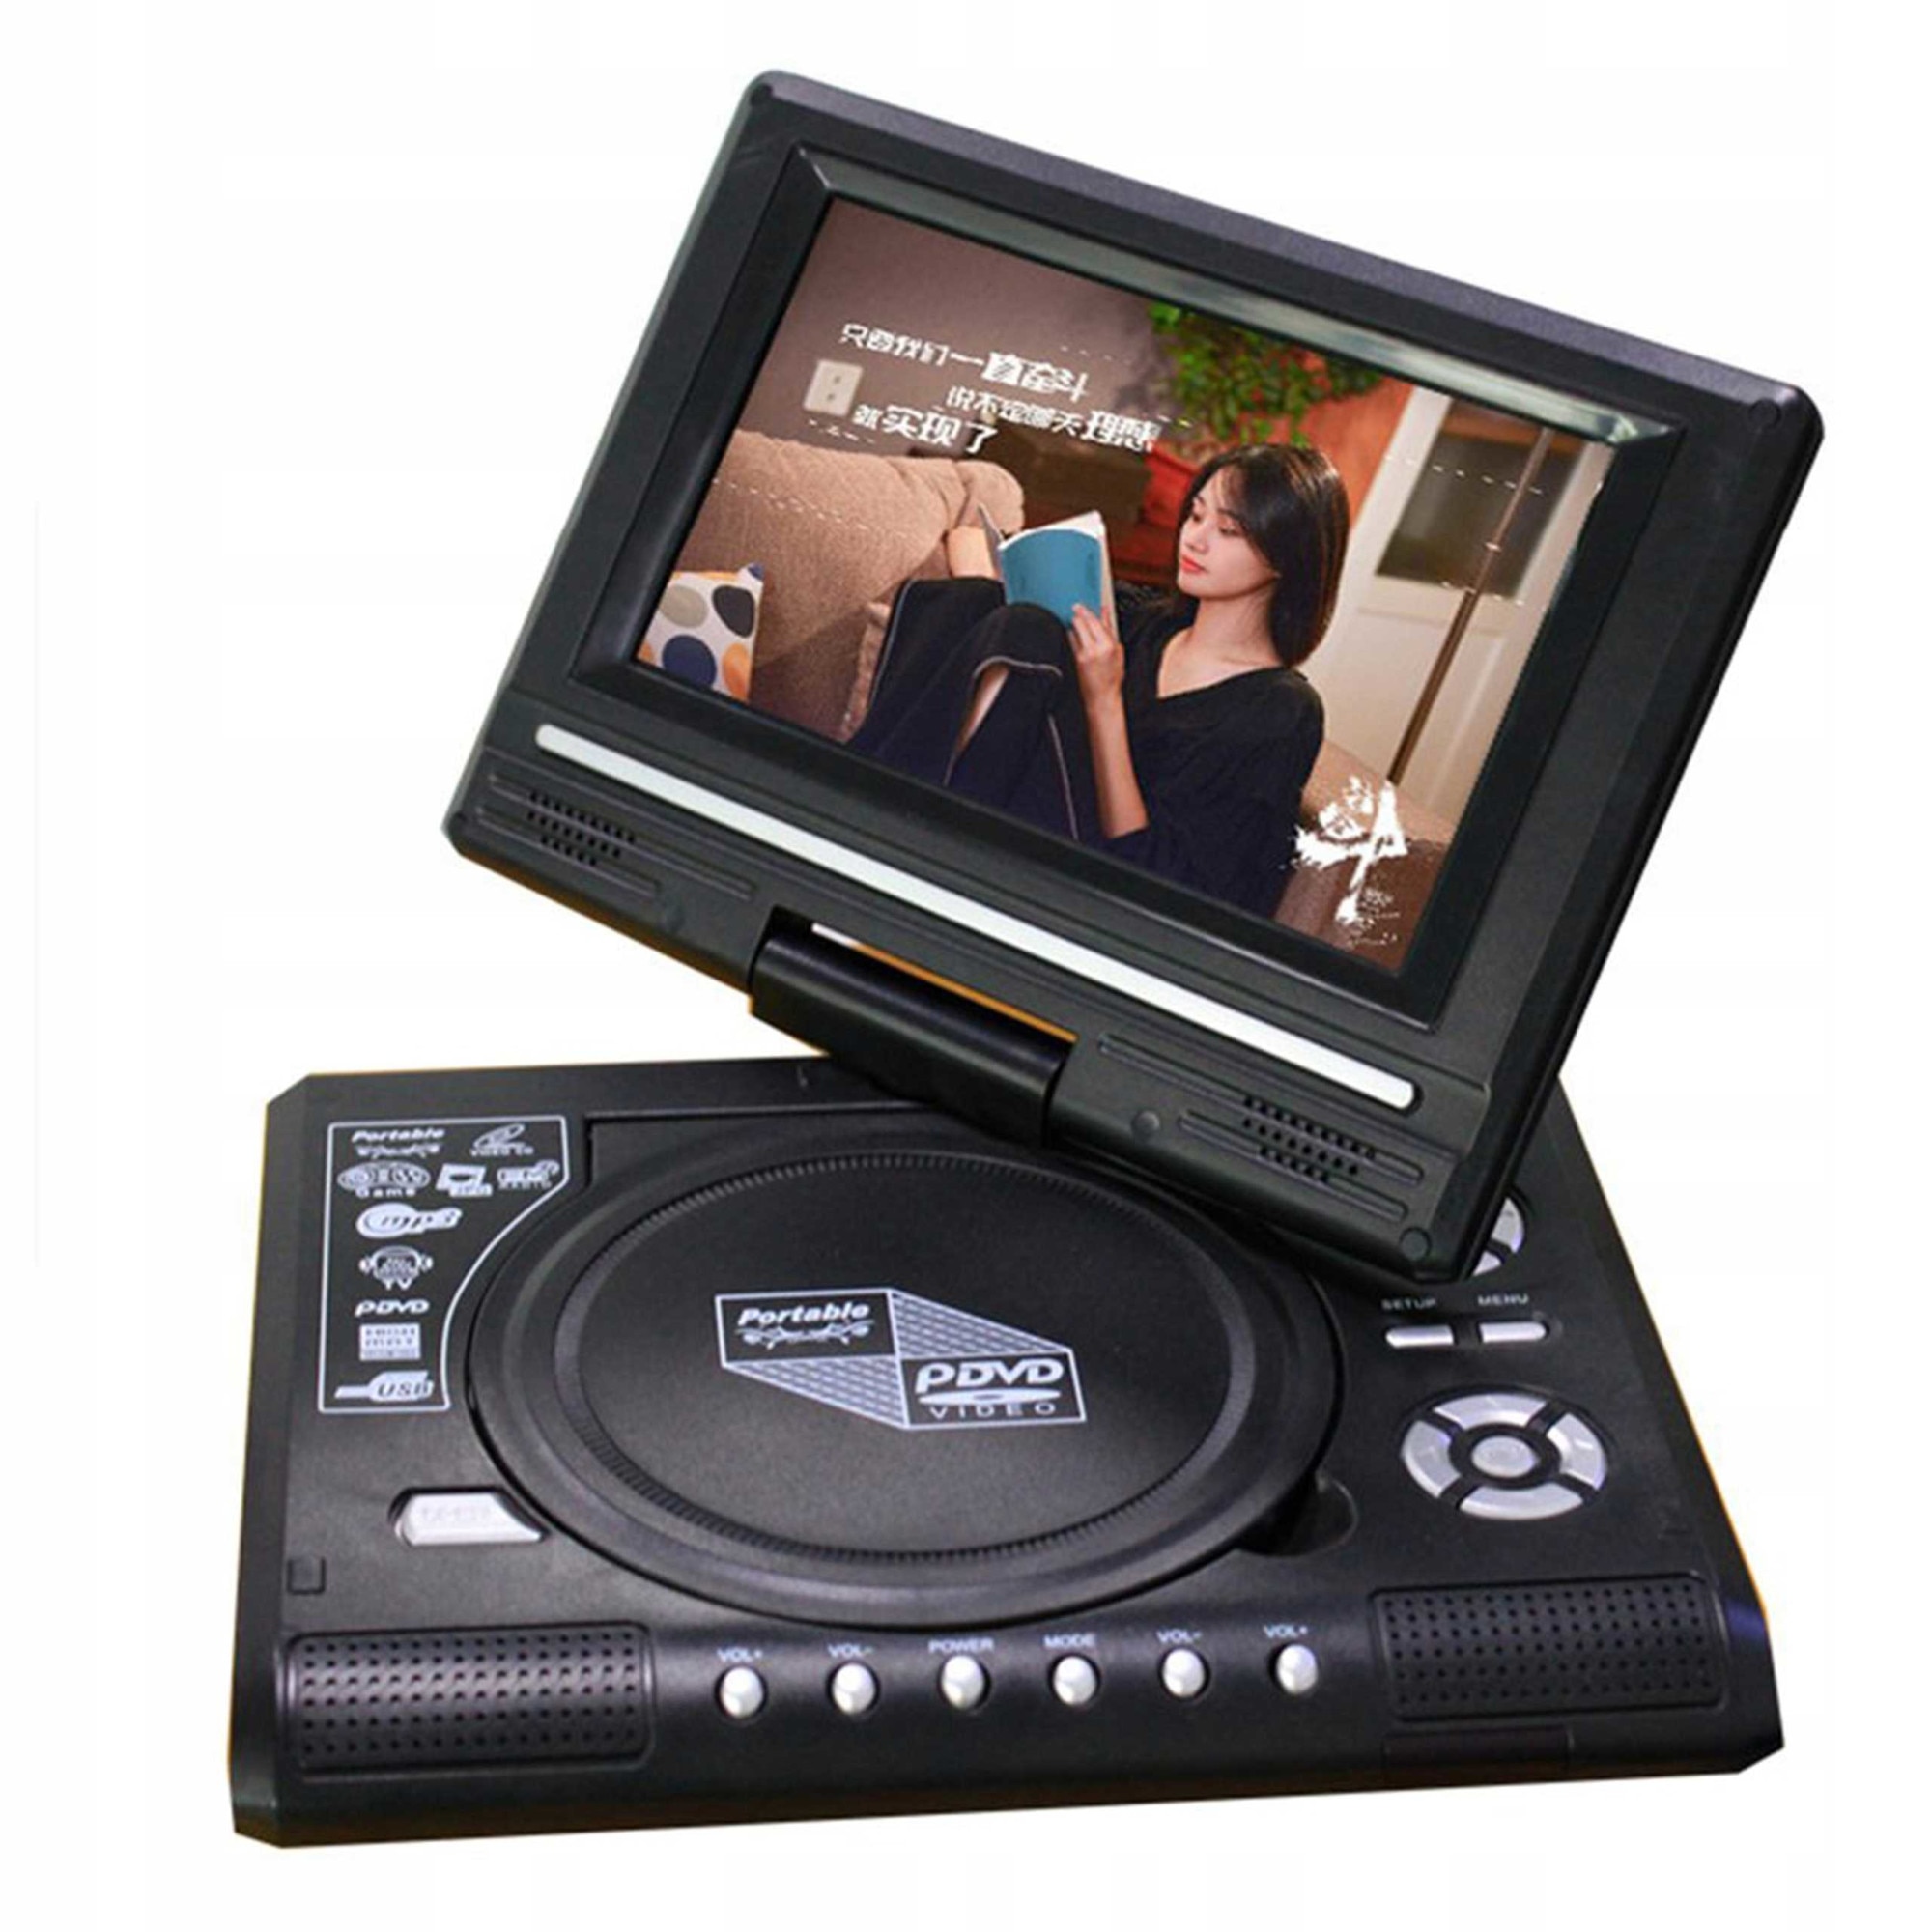 Assimilate let down include DVD portabil, 7.8", Cu functie TV analogica, USB, Negru - eMAG.ro